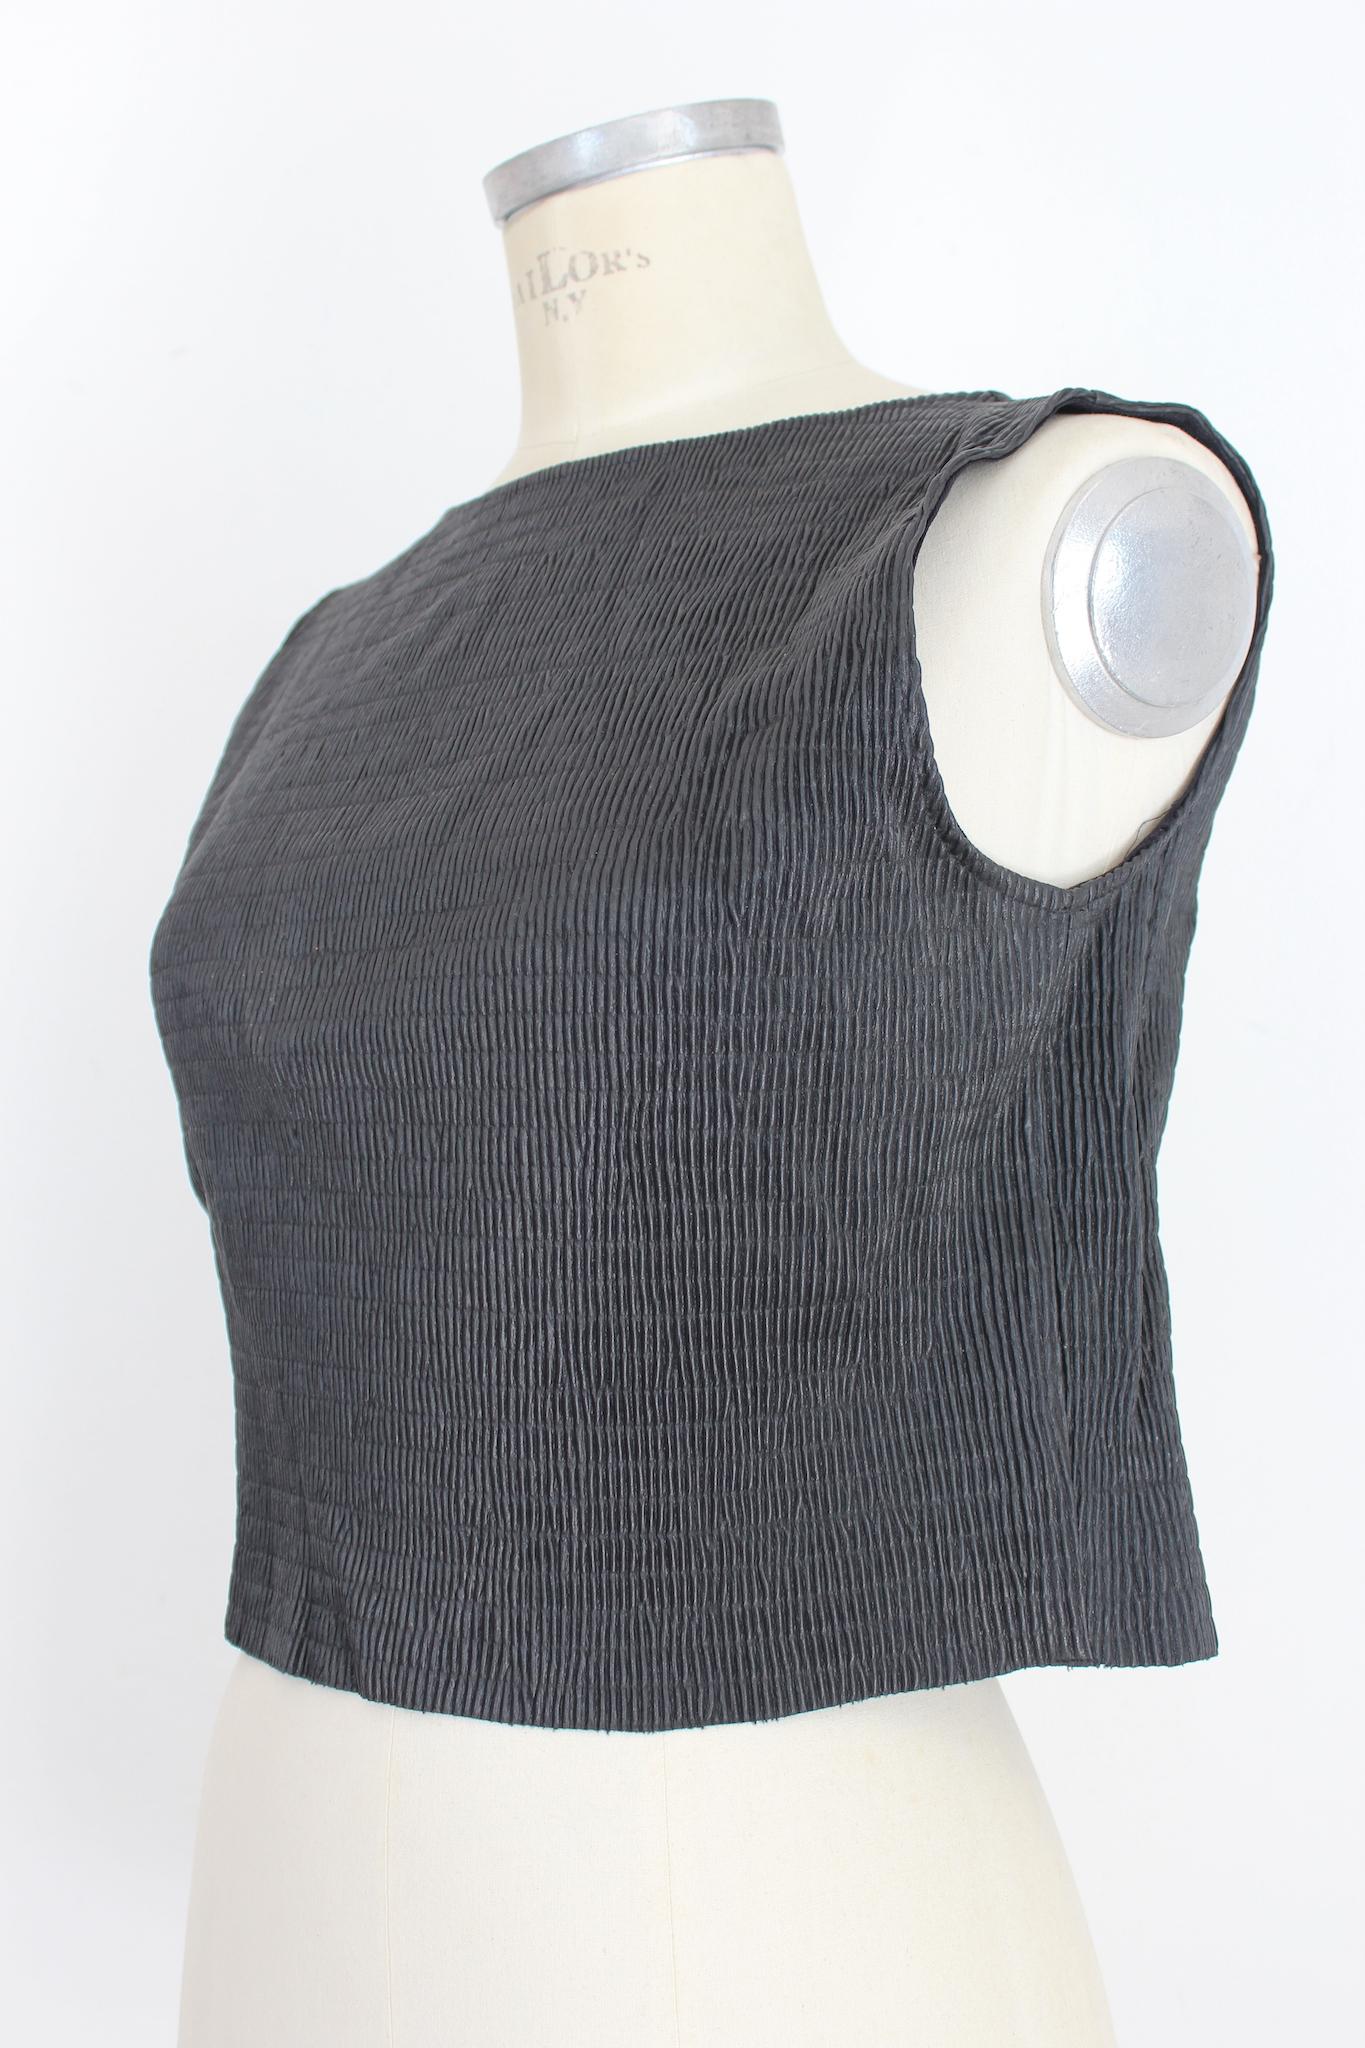 Krizia Black Faux Leather Pleated Vintage Short Top 80s In Excellent Condition For Sale In Brindisi, Bt